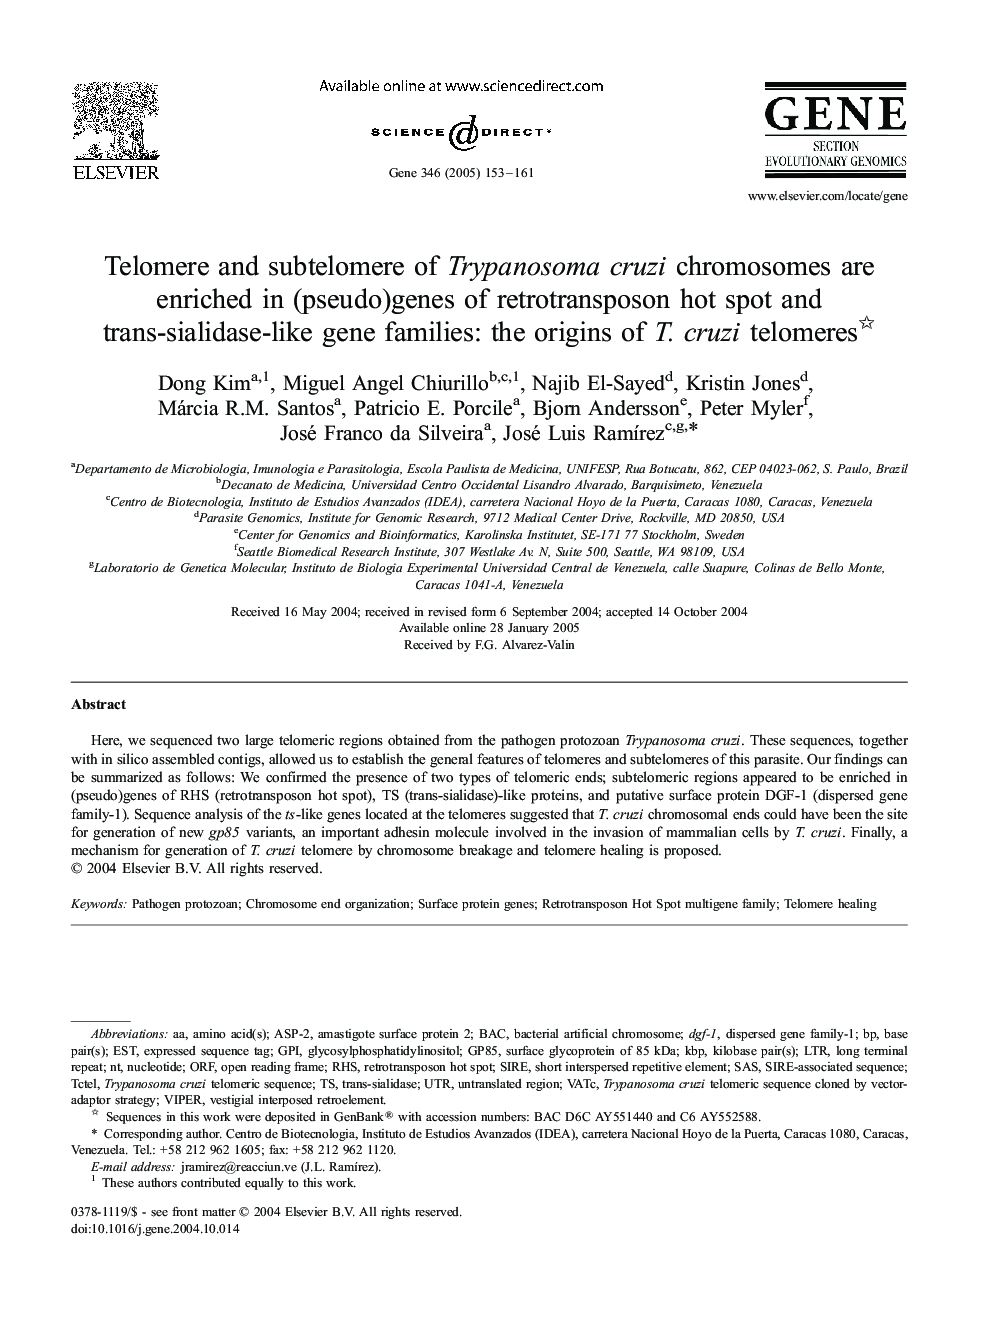 Telomere and subtelomere of Trypanosoma cruzi chromosomes are enriched in (pseudo)genes of retrotransposon hot spot and trans-sialidase-like gene families: the origins of T. cruzi telomeres